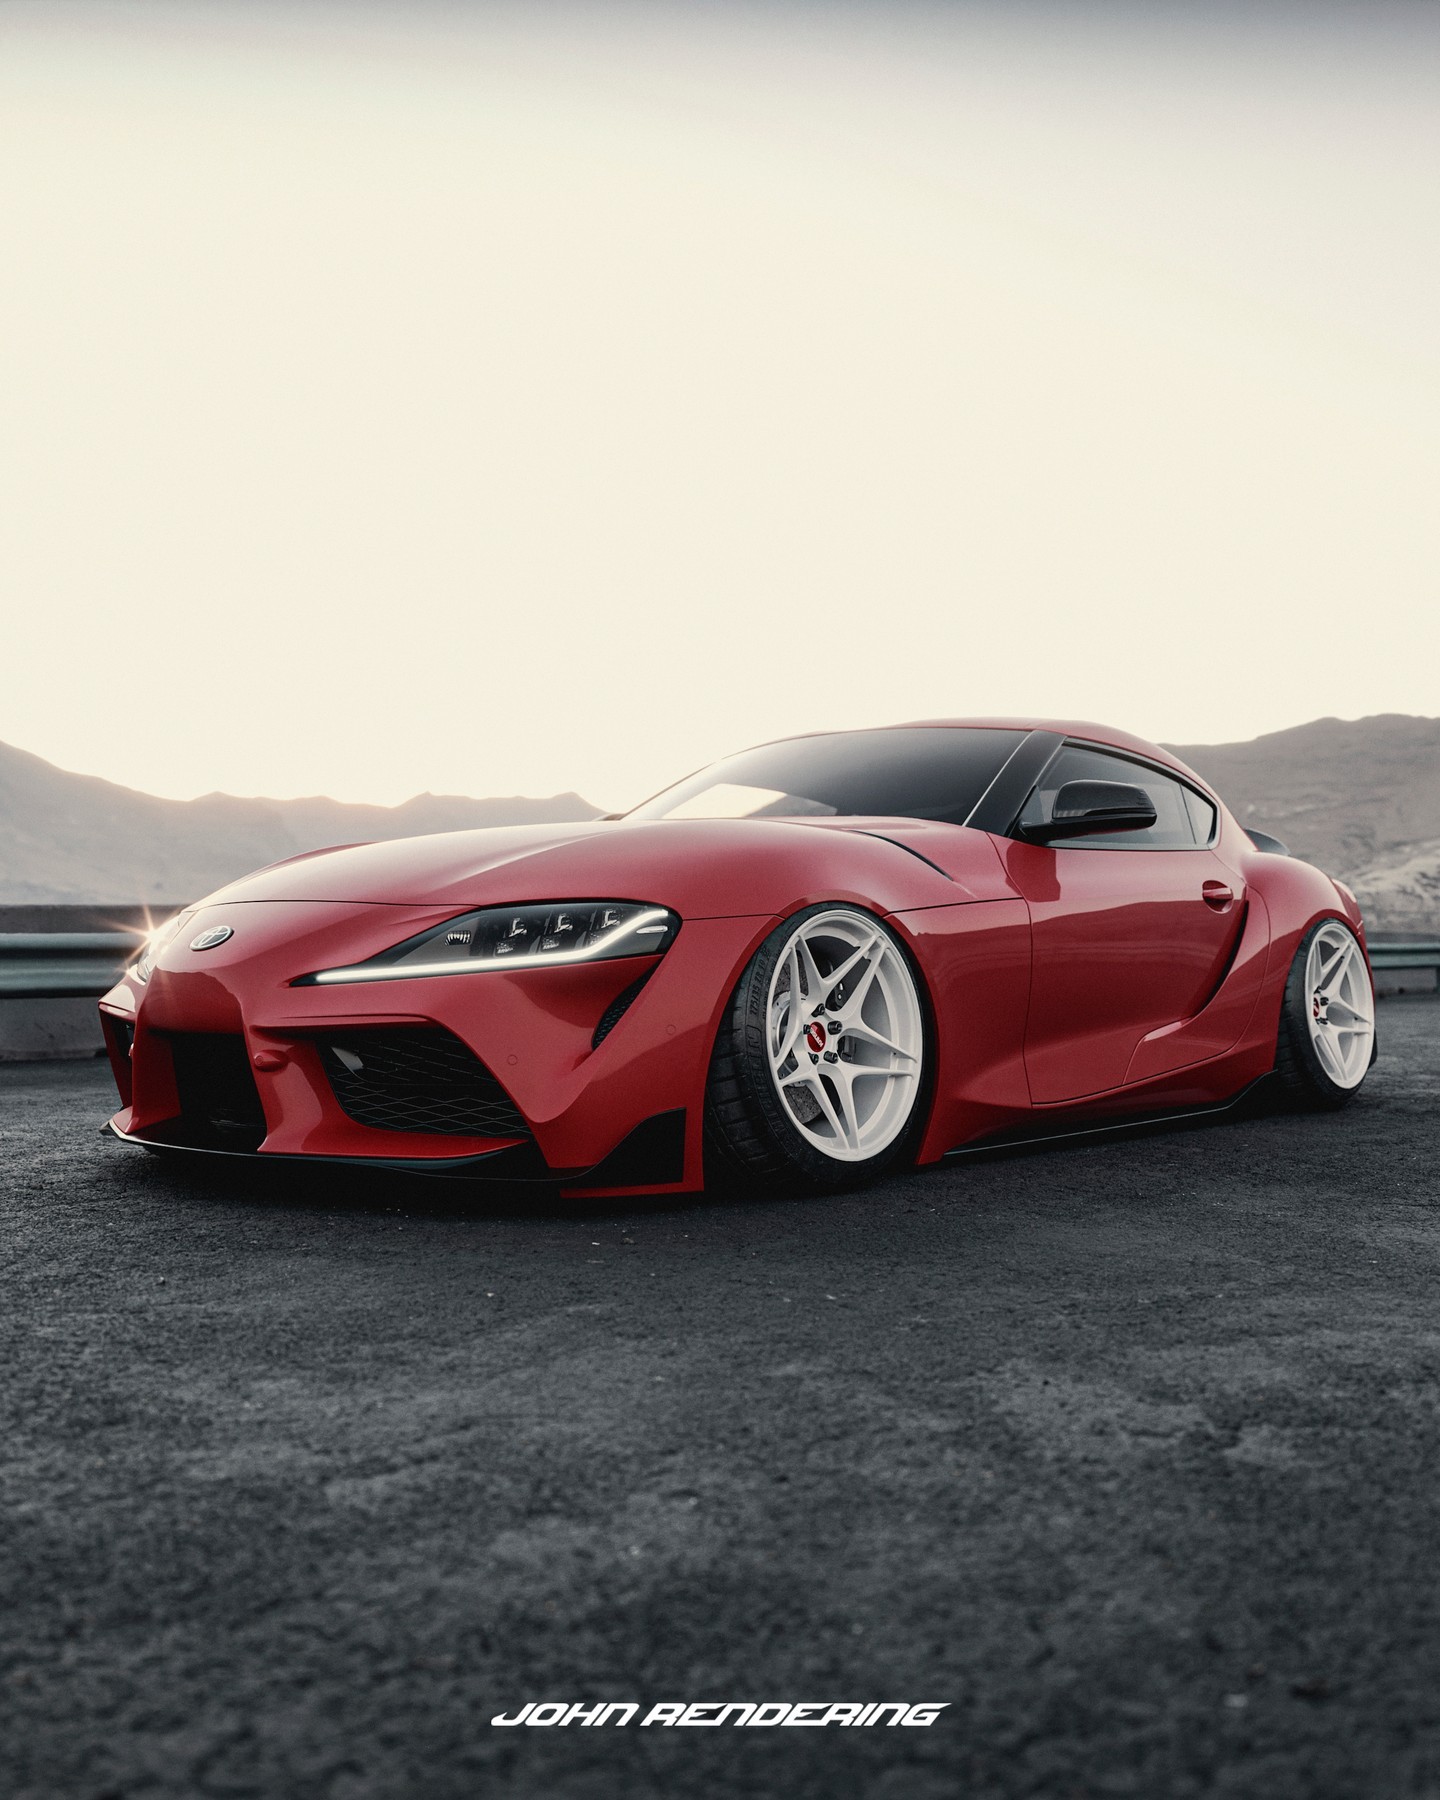 Slammed Widebody Toyota Gr Supra Lovehate Build Is Stanced Enough For